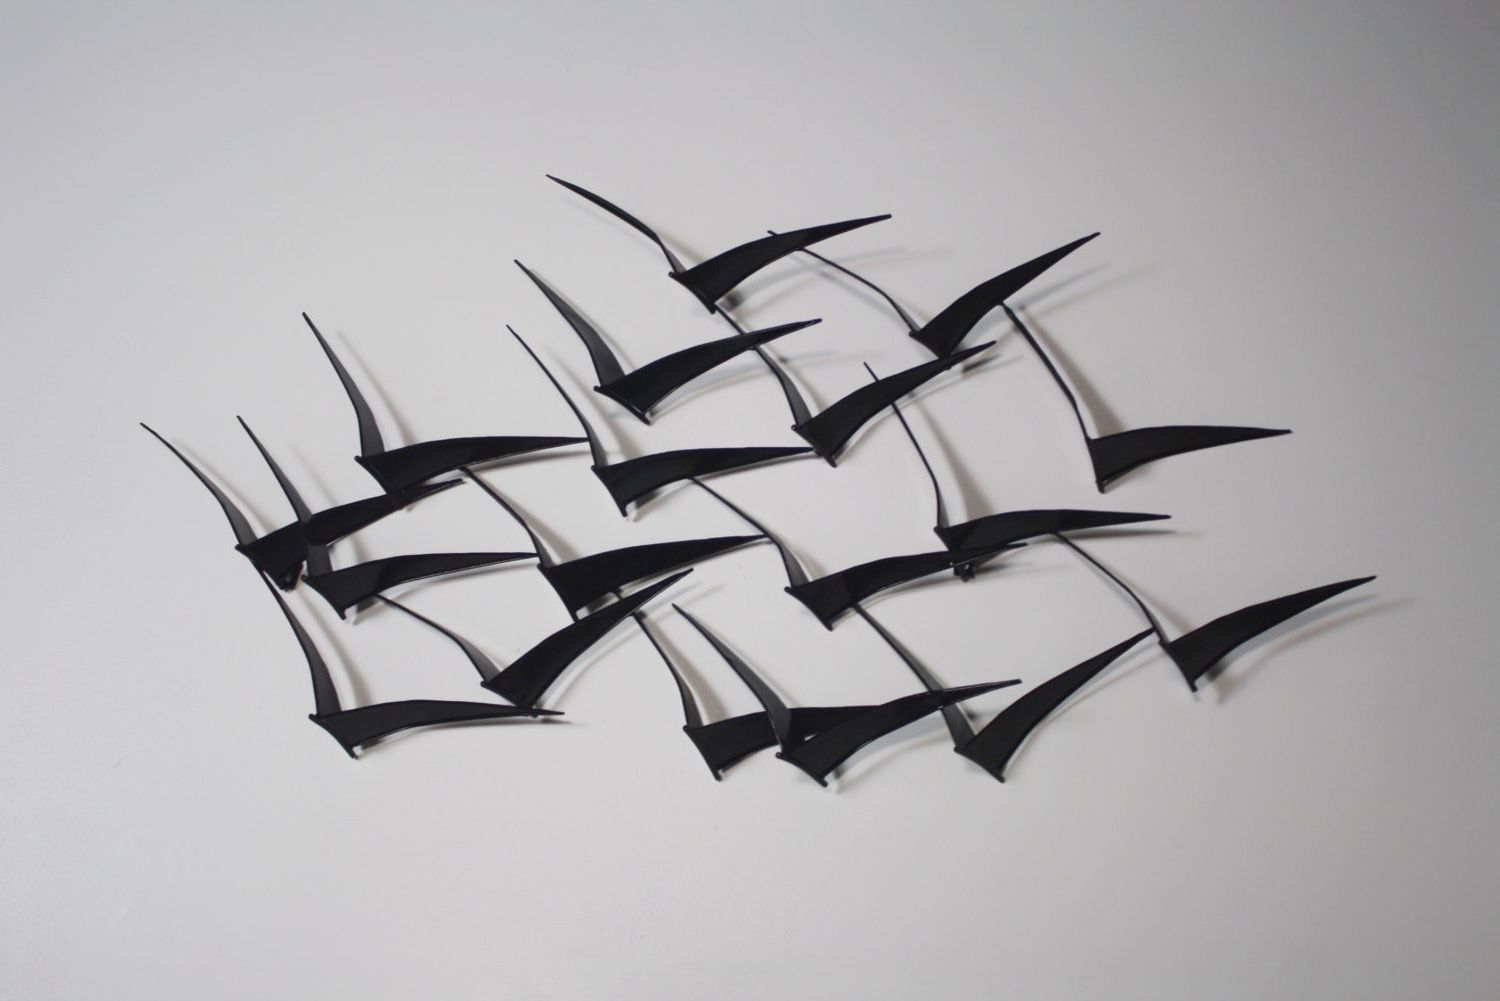 Best And Newest Curtis Jere “birds In Flight” Wall Art Sculpture Metalwork For Within C Jere Wall Art (View 5 of 15)